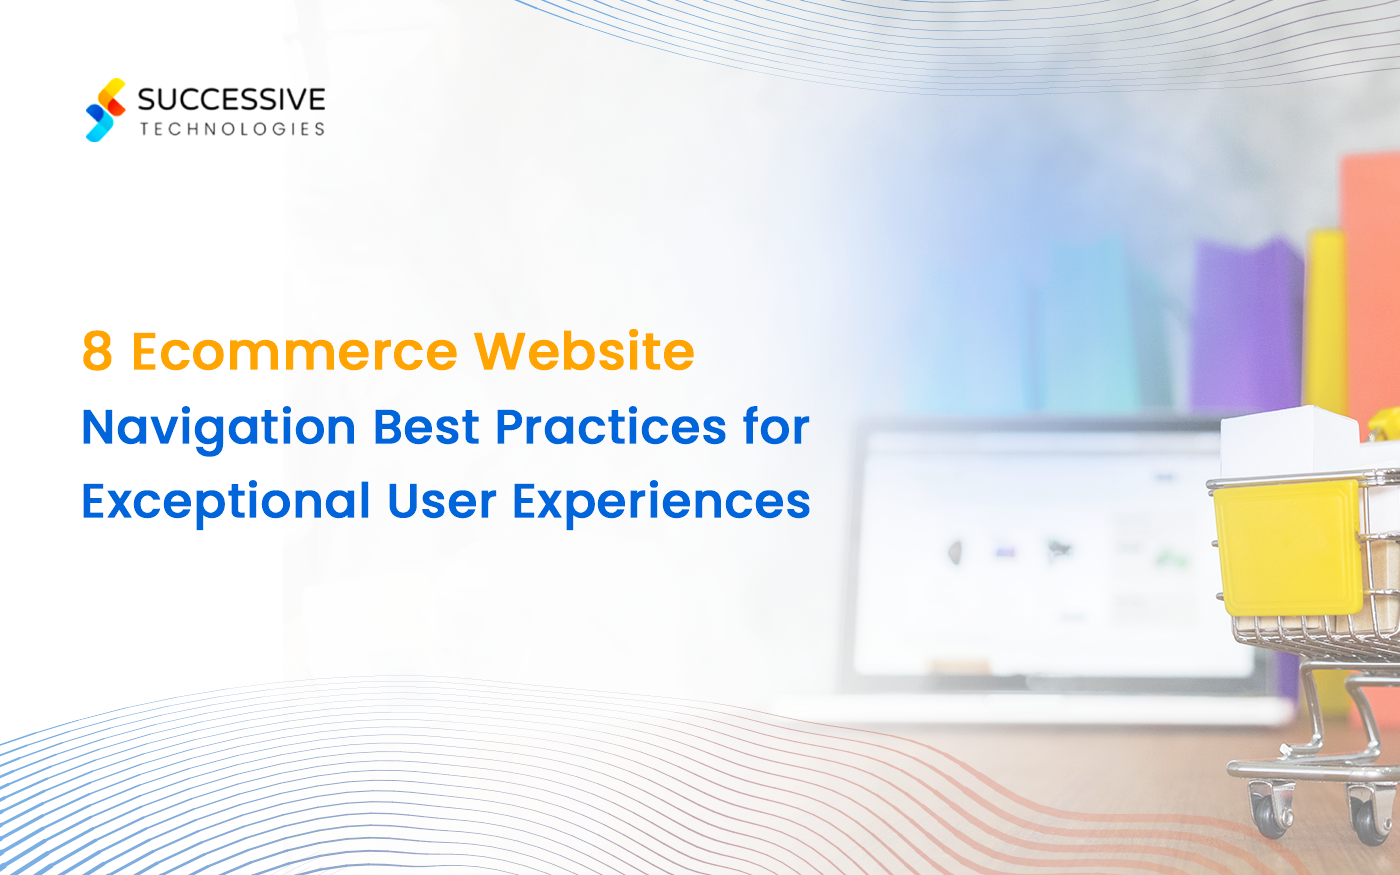 8 Ecommerce Website Navigation Best Practices for Exceptional User Experiences